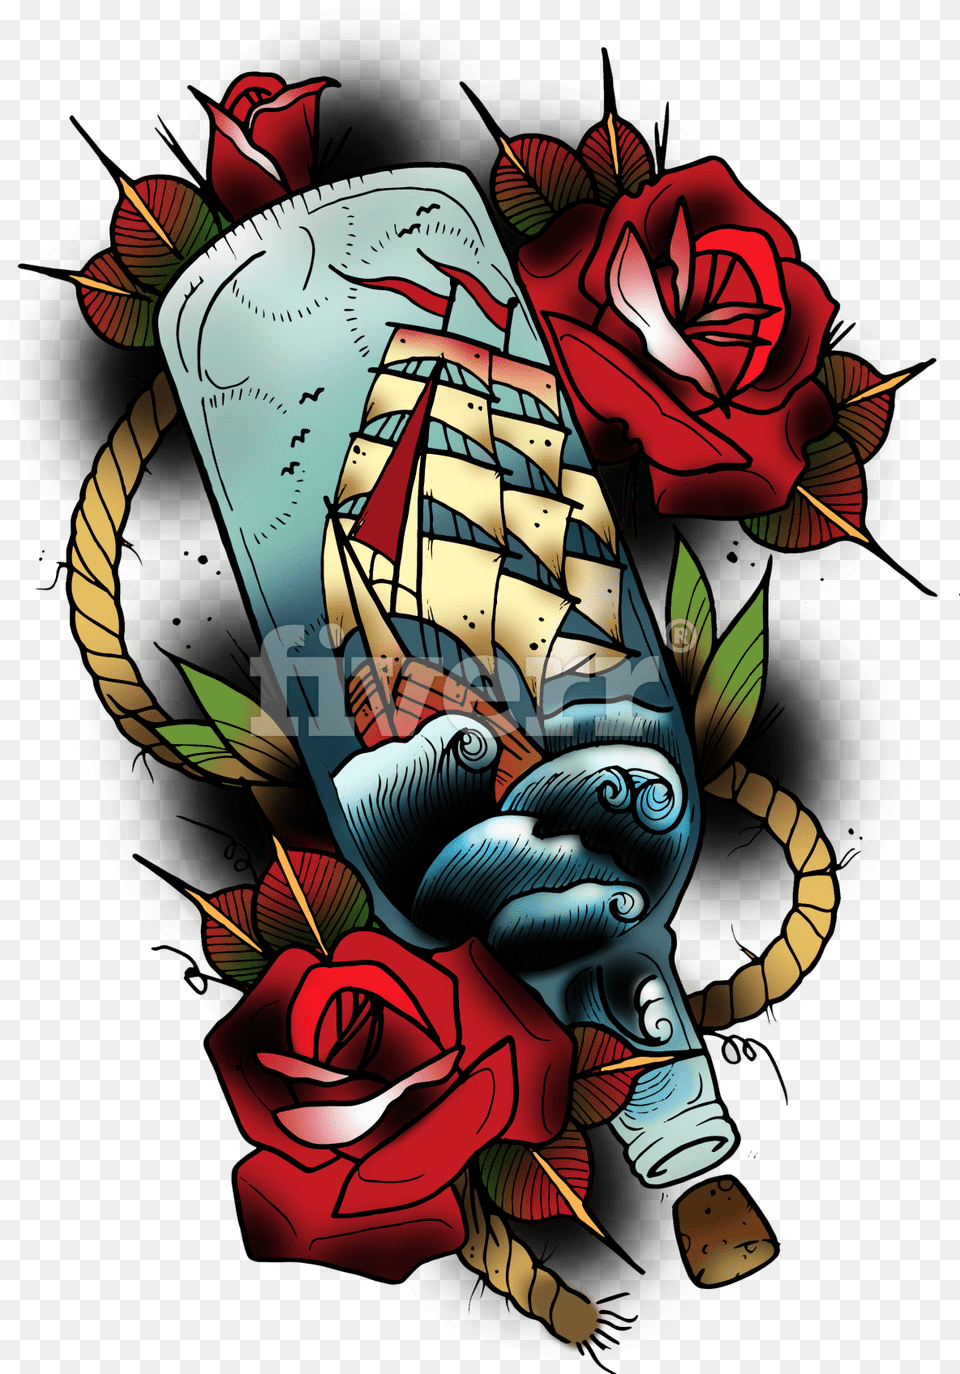 Make Neotraditional By Jilliancorpse Neo Traditional Tattoo Designs, Rose, Plant, Flower, Art Free Transparent Png